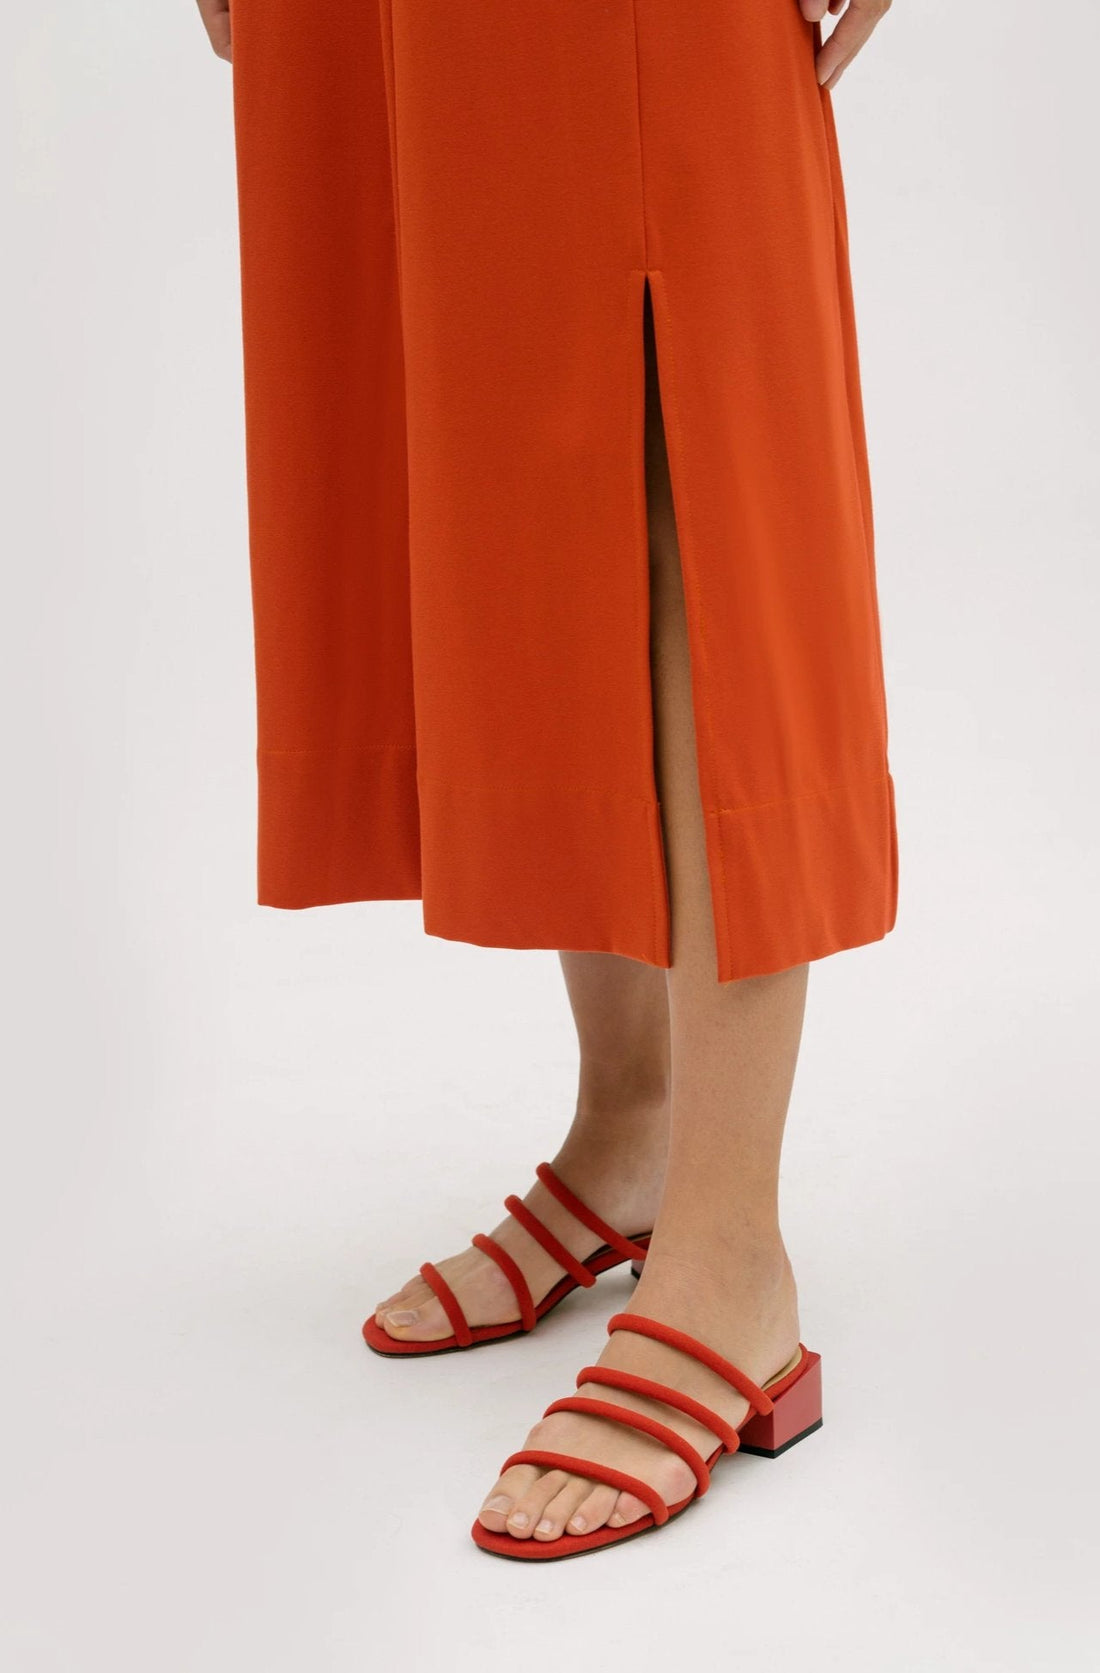 A woman wearing an orange dress.  She is also wearing red strappy sandals.